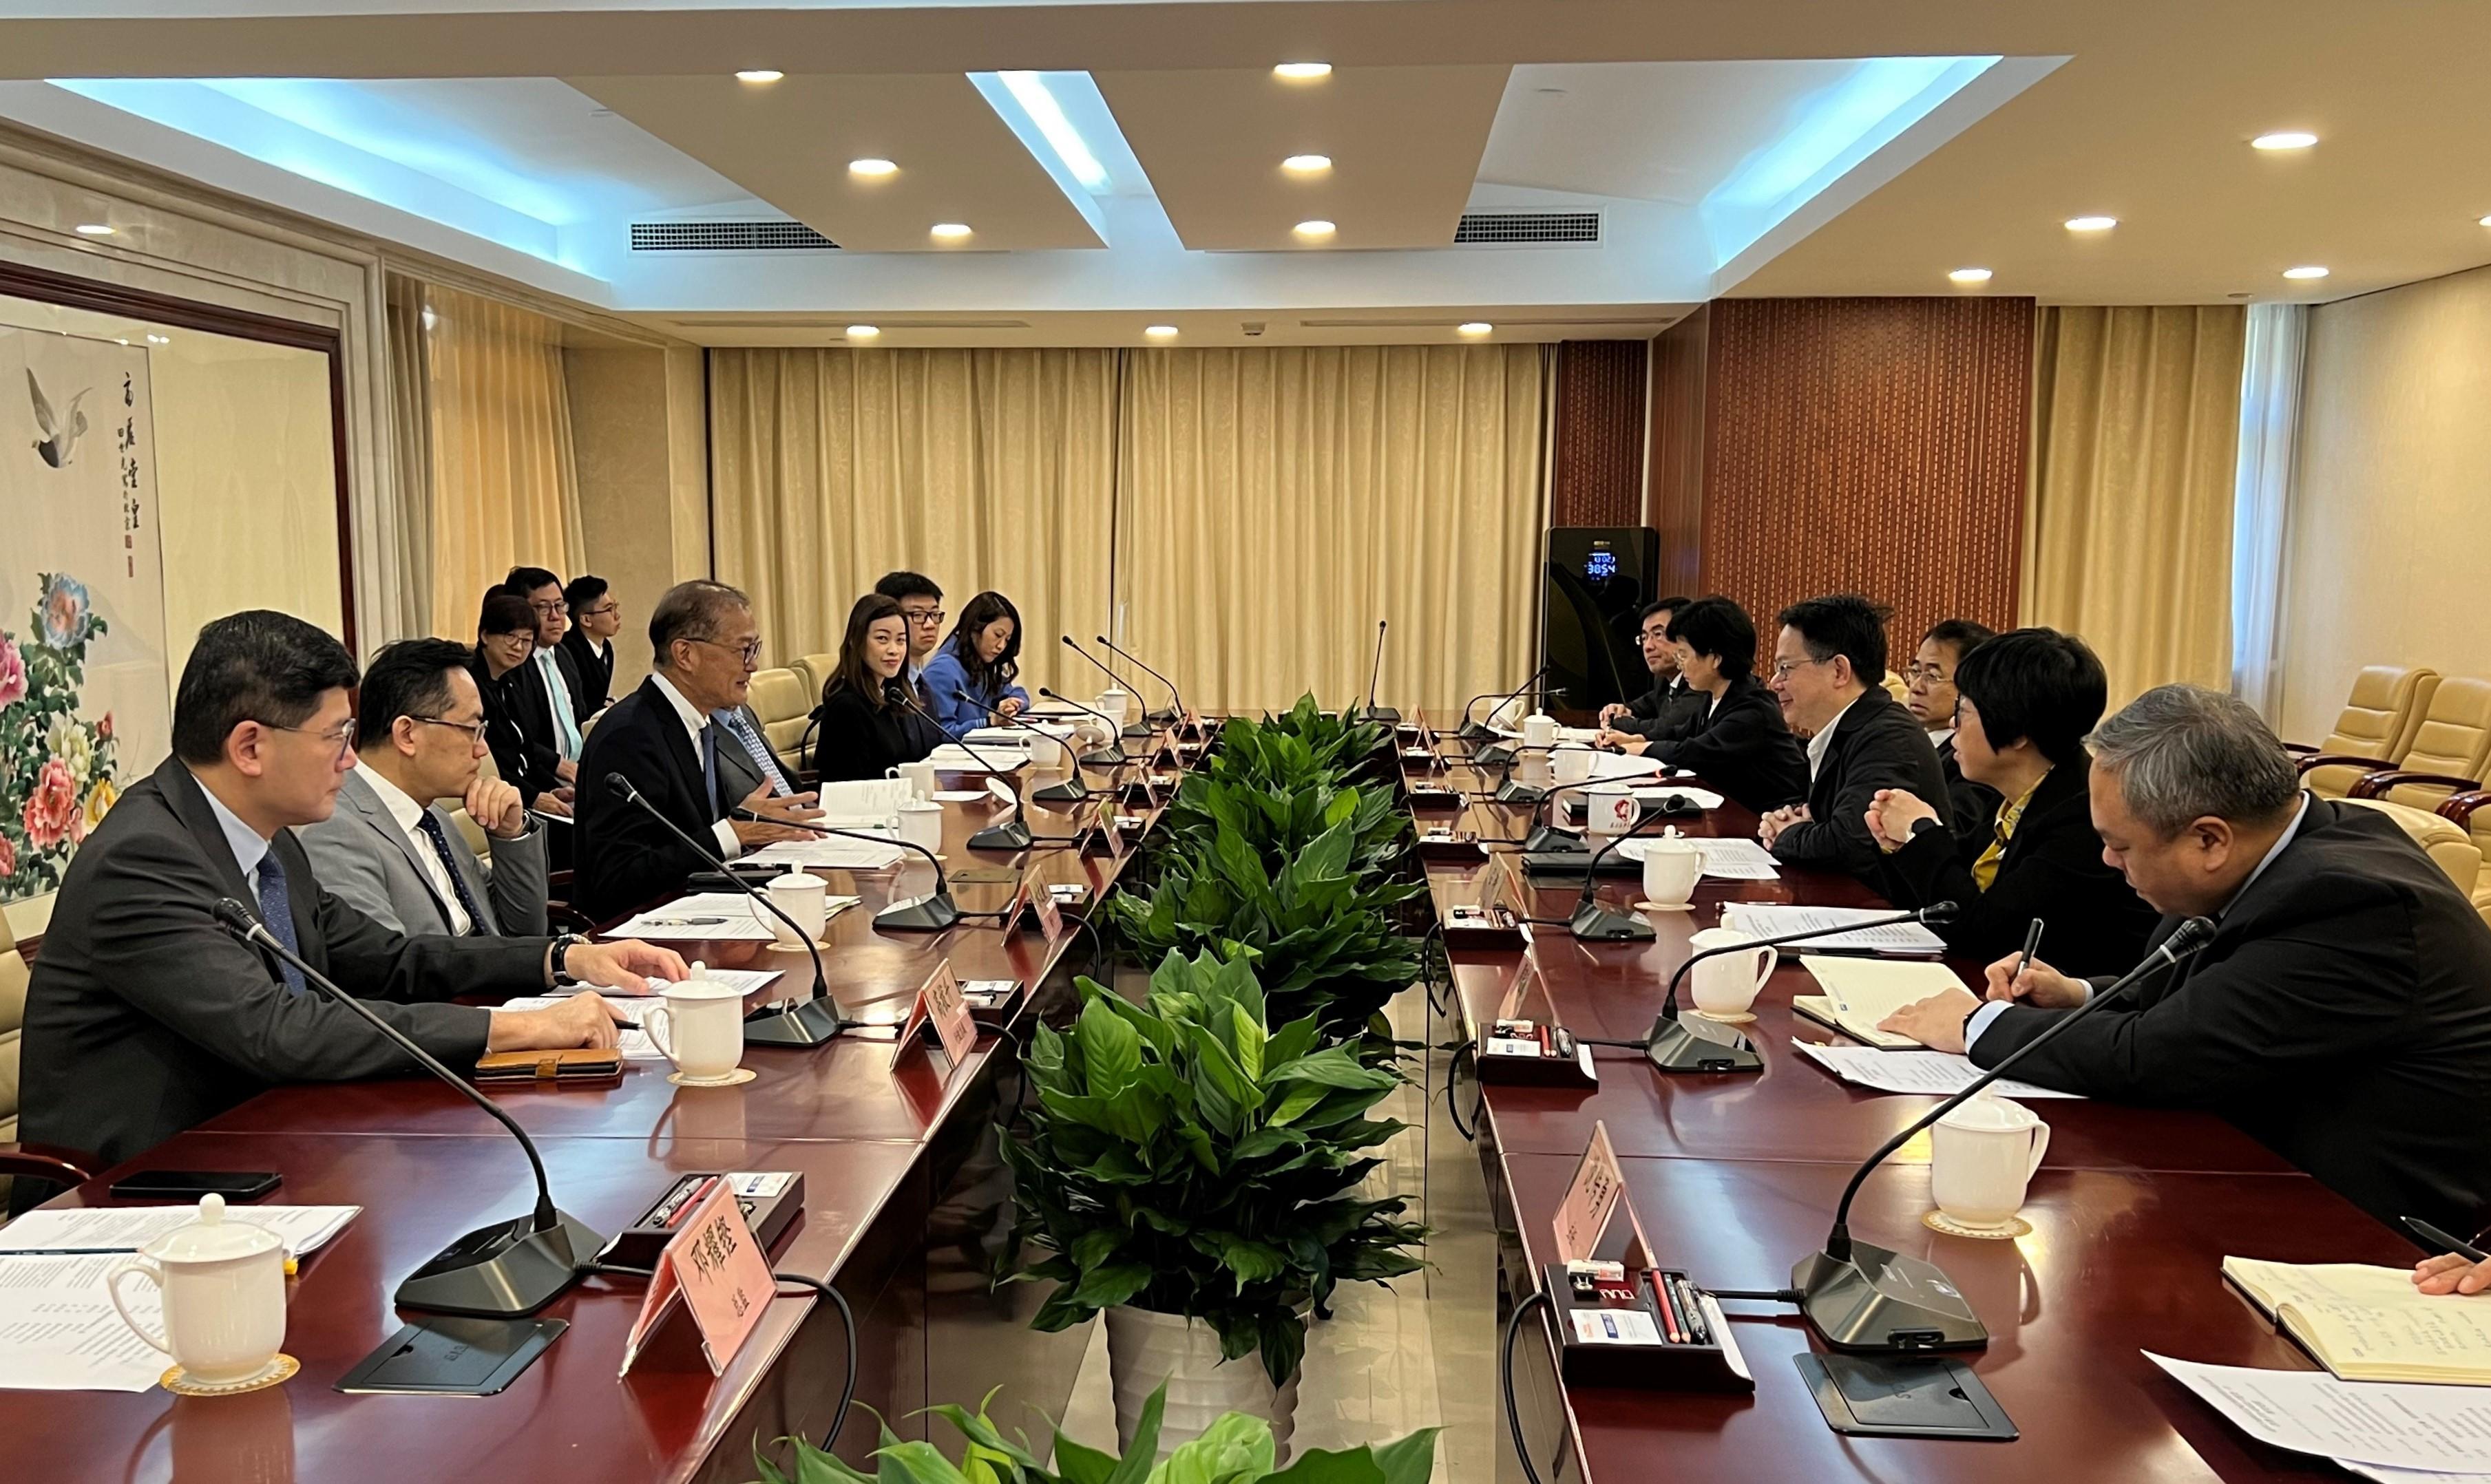 The Secretary for Health, Professor Lo Chung-mau (third left), and his delegation met with Deputy Commissioner of the National Medical Products Administration Mr Zhao Junning (third right) in Beijing today (November 8). They exchanged views on boosting closer collaboration between the Mainland and Hong Kong on matters such as approval of drugs and medical devices, and clinical trial work.